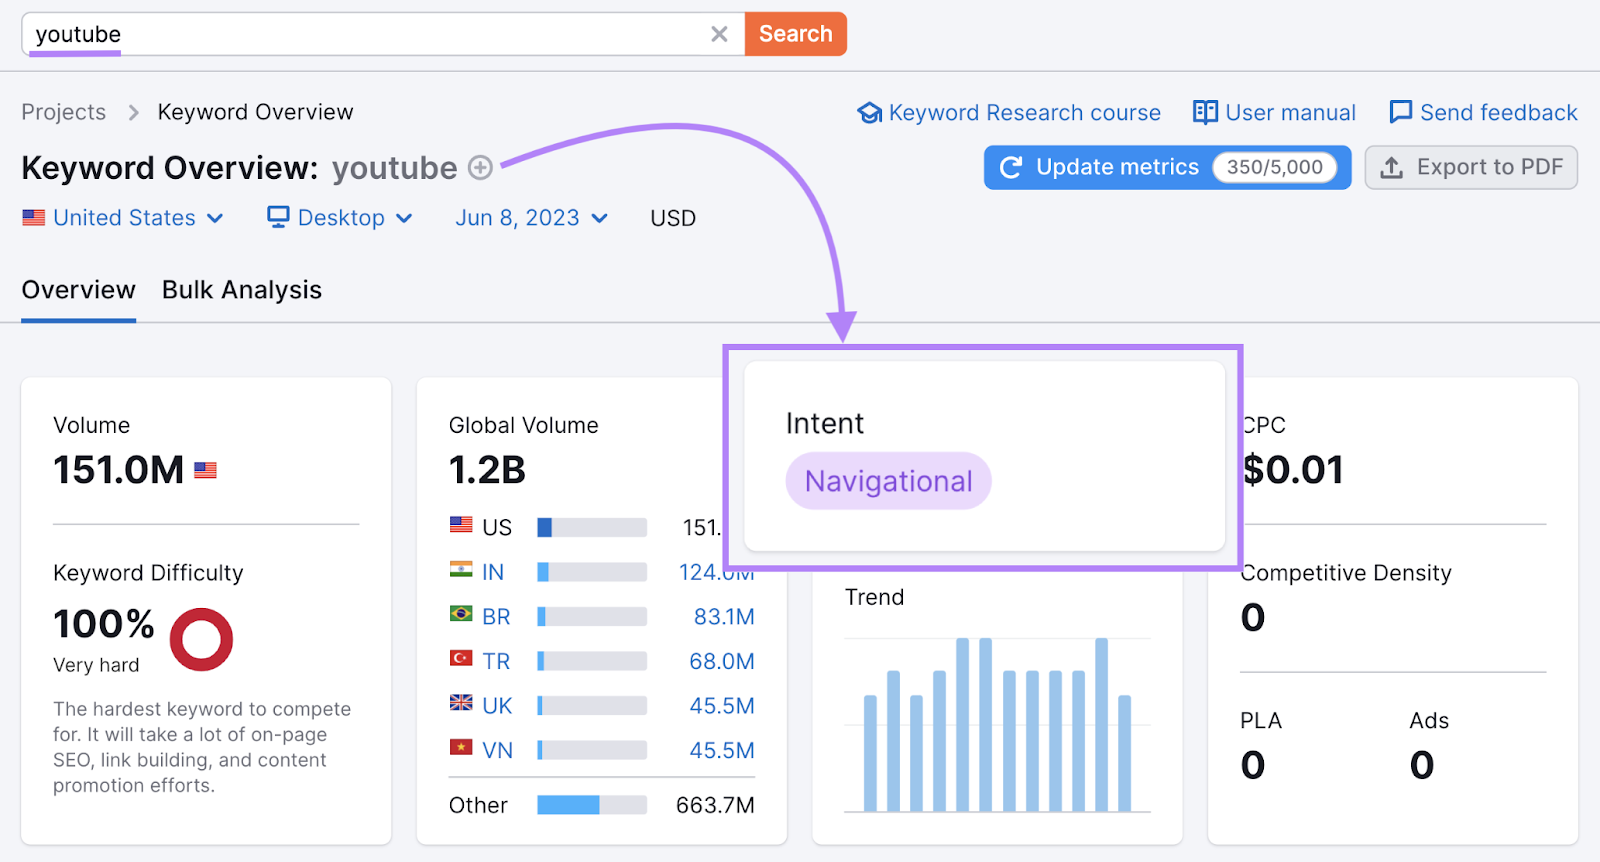 "youtube" keyword shows navigational search intent in Keyword Overview tool